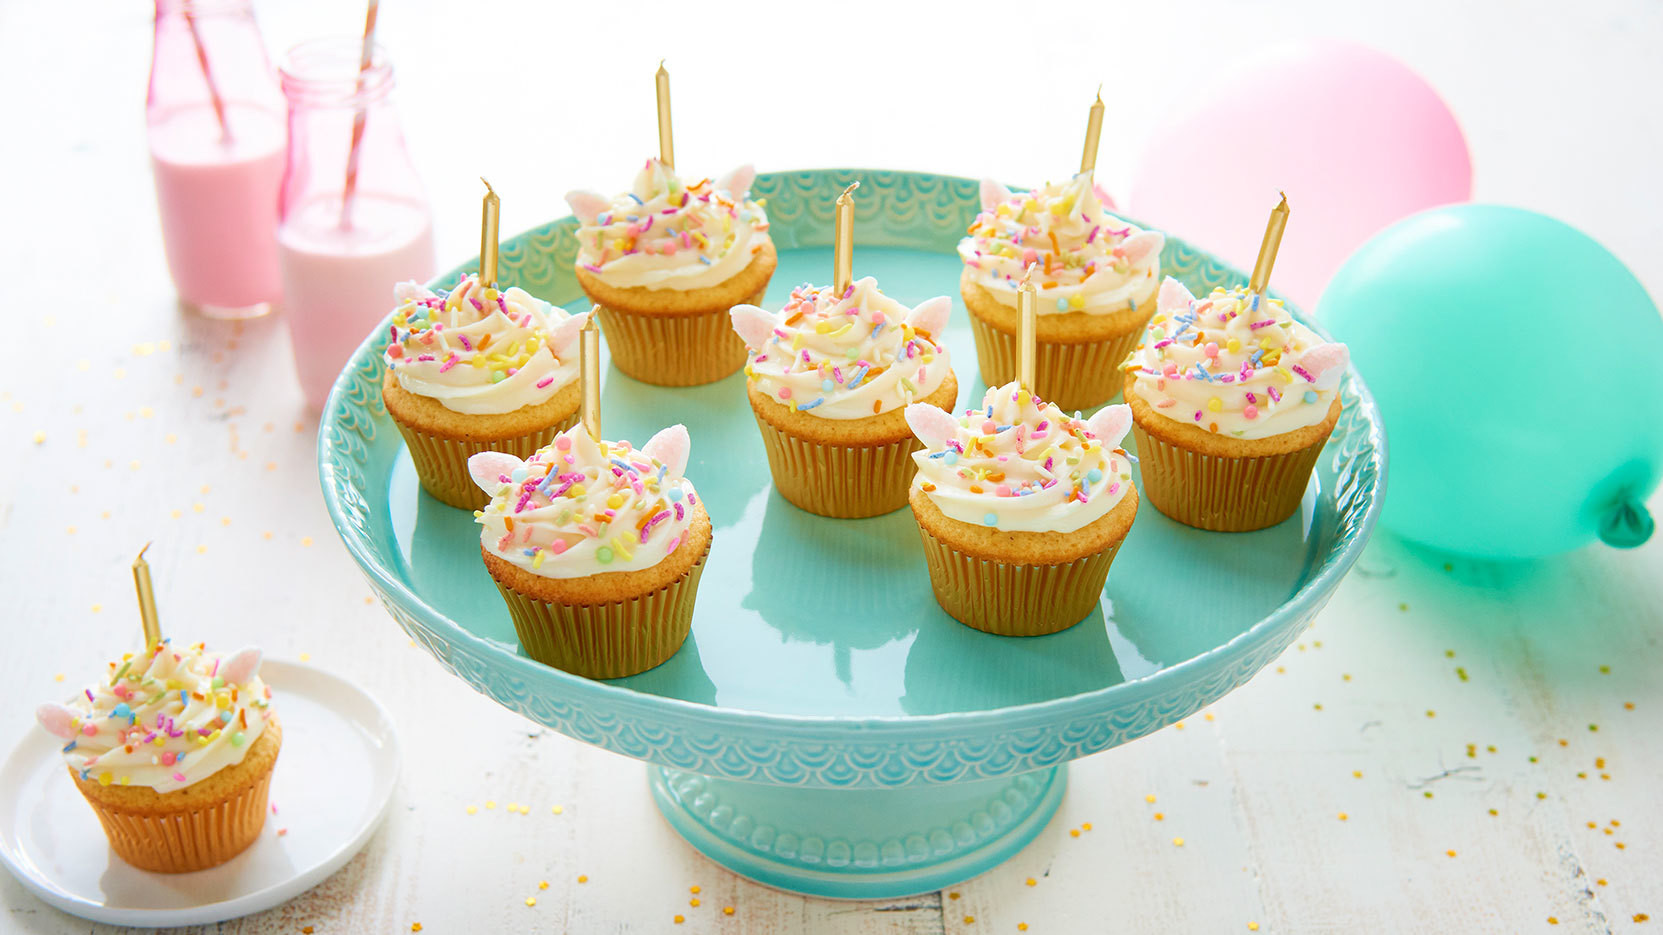 Unicorn Food Party Ideas
 Magical Unicorn Birthday Party Ideas for Kids EatingWell